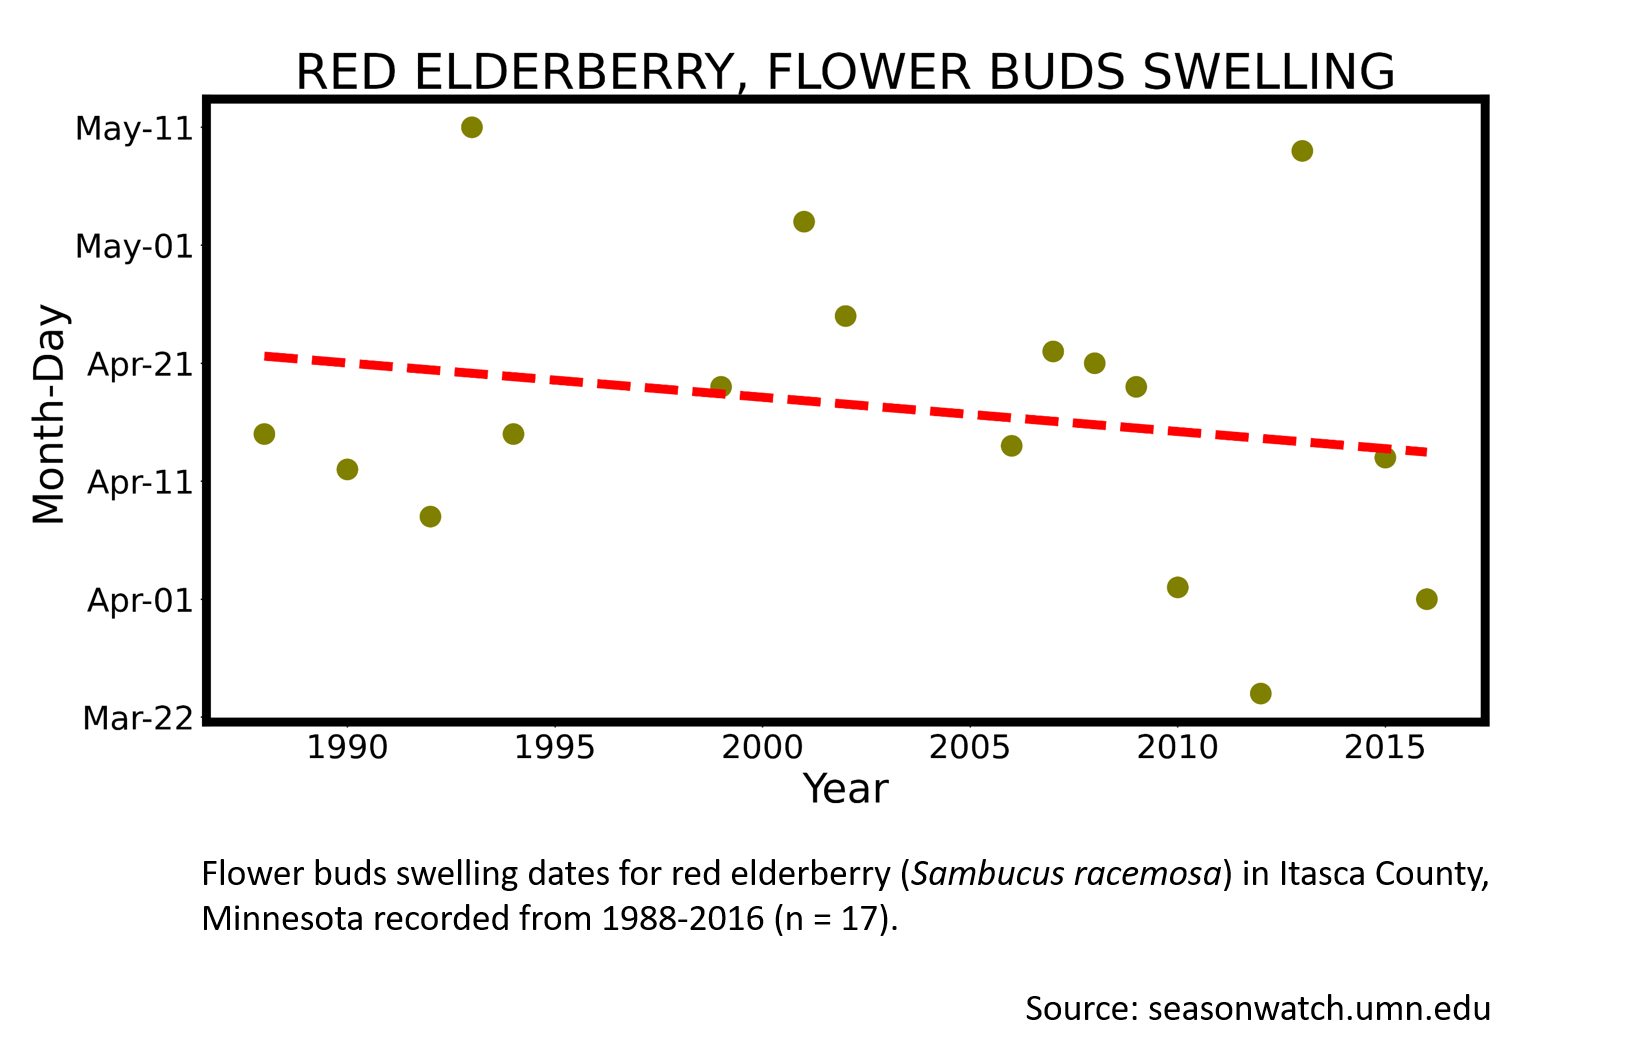 Scatterplot showing red elderberry phenology observations in Itasca County, Minnesota